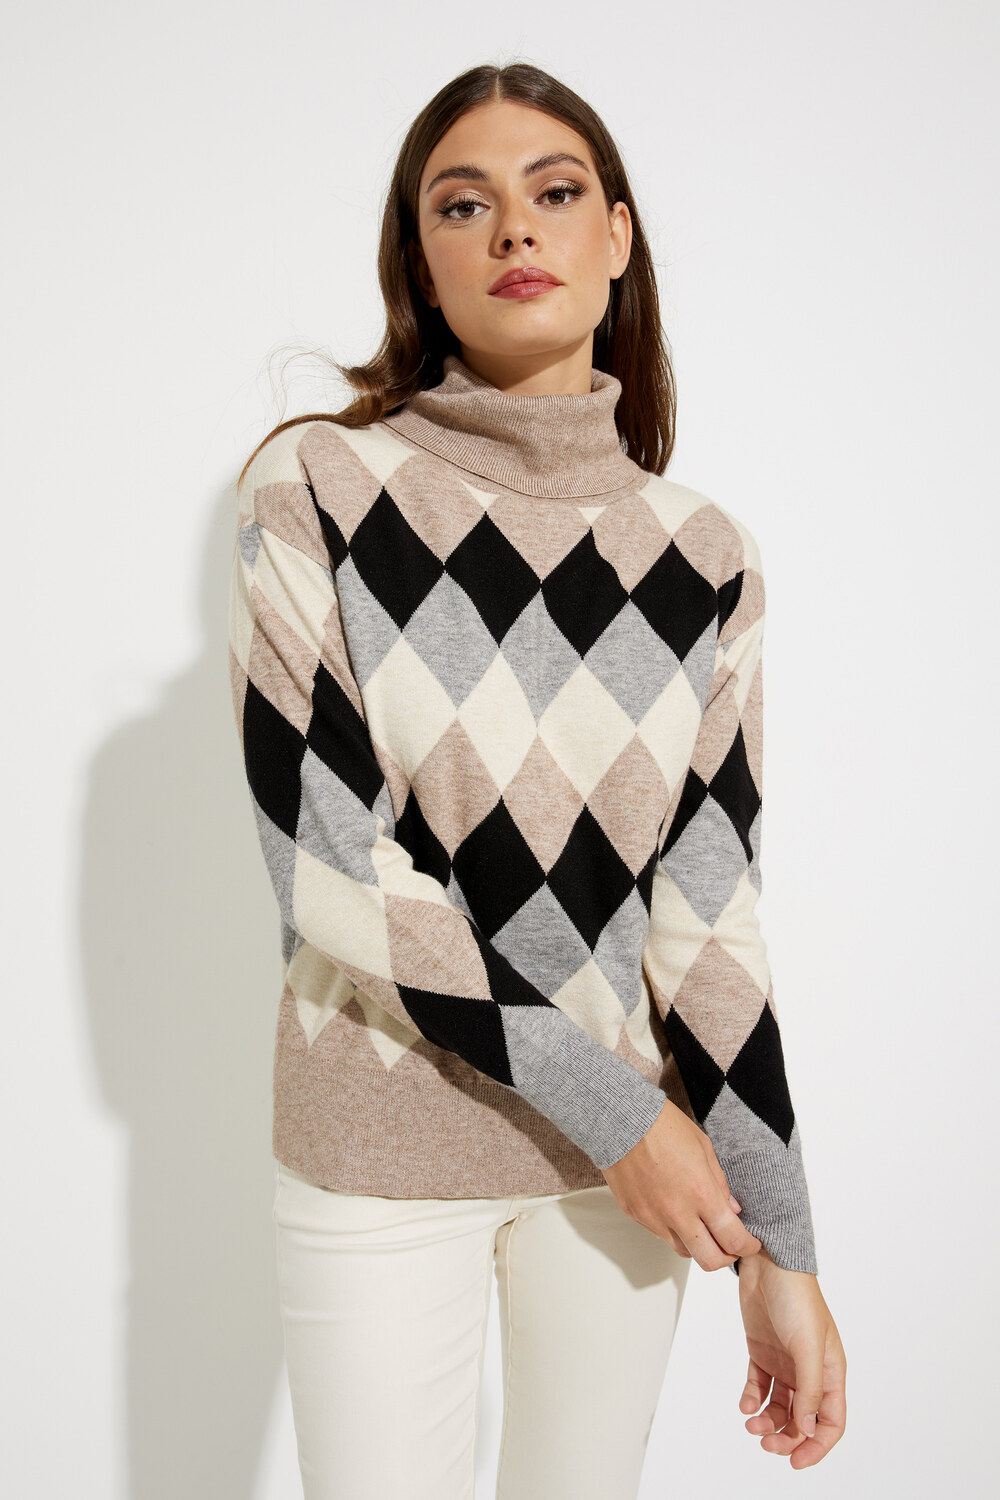 Harlequin Turtle Neck Sweater Style C2469. Taupe